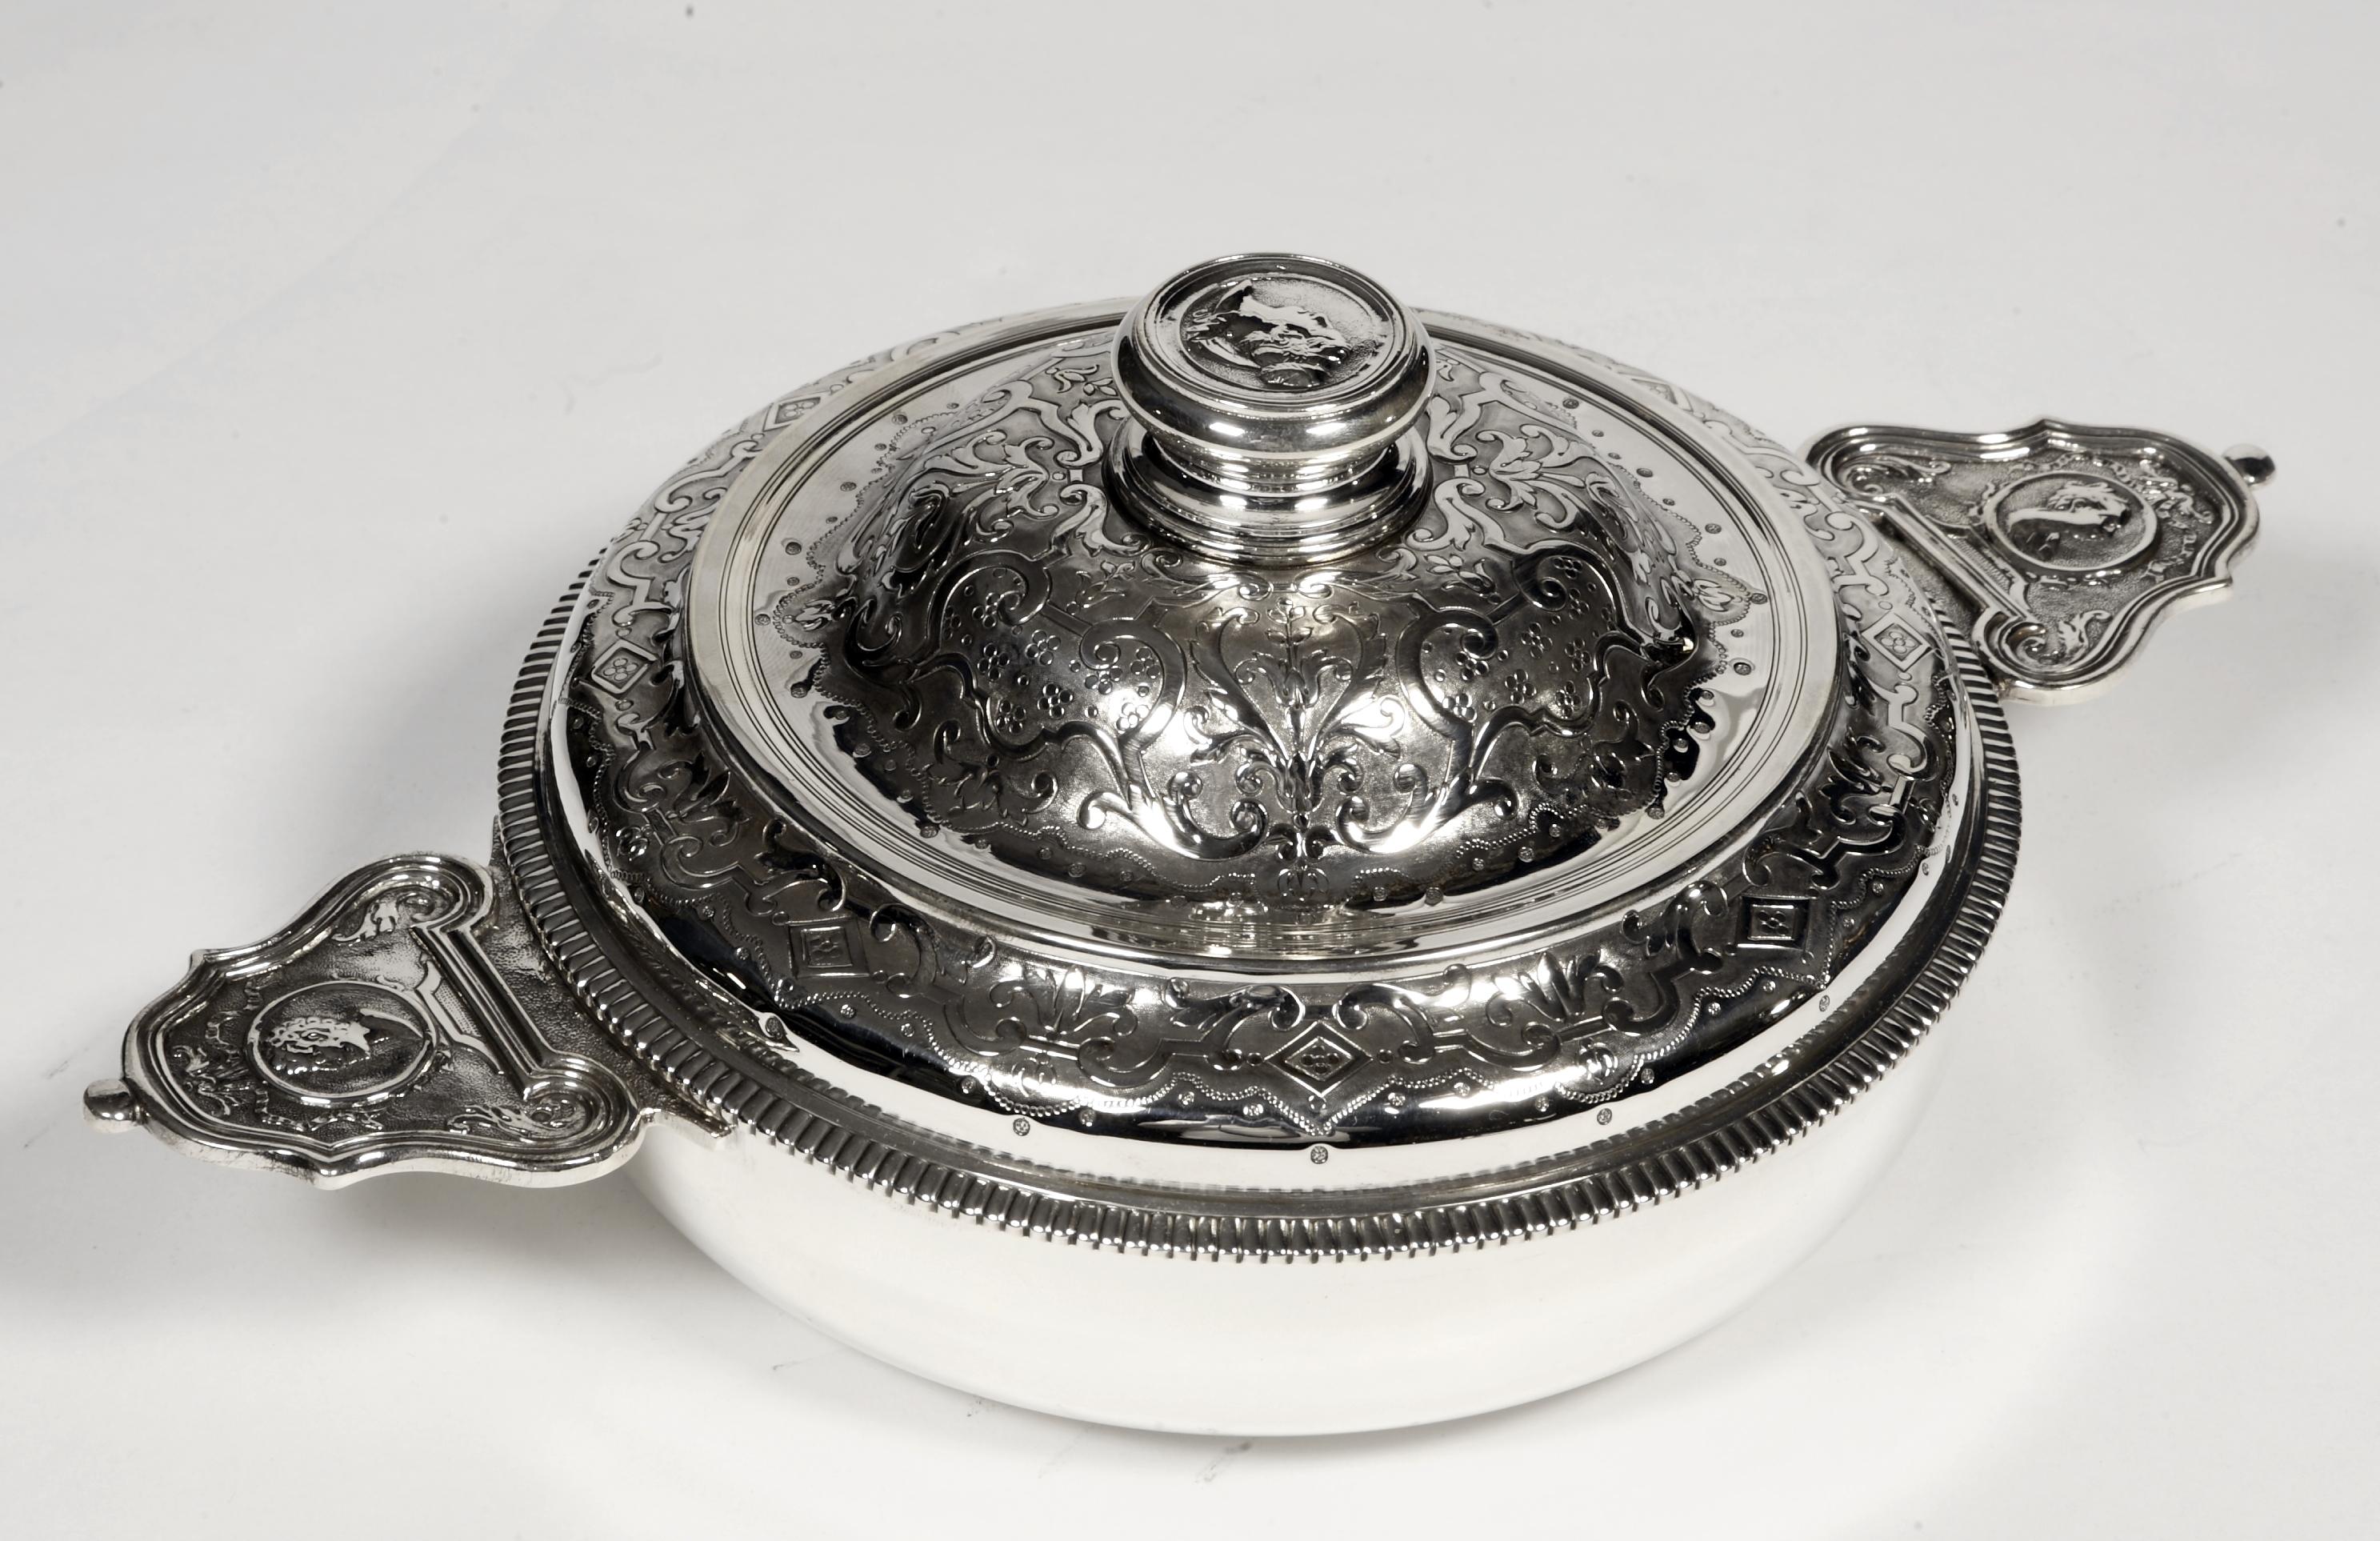 Silver vegetable dish in round shape. The plain body is flanked by two side handles with ears presenting a medallion on a chiseled amati background with a man's head on one side and a woman's head on the other. The lid with circumference of